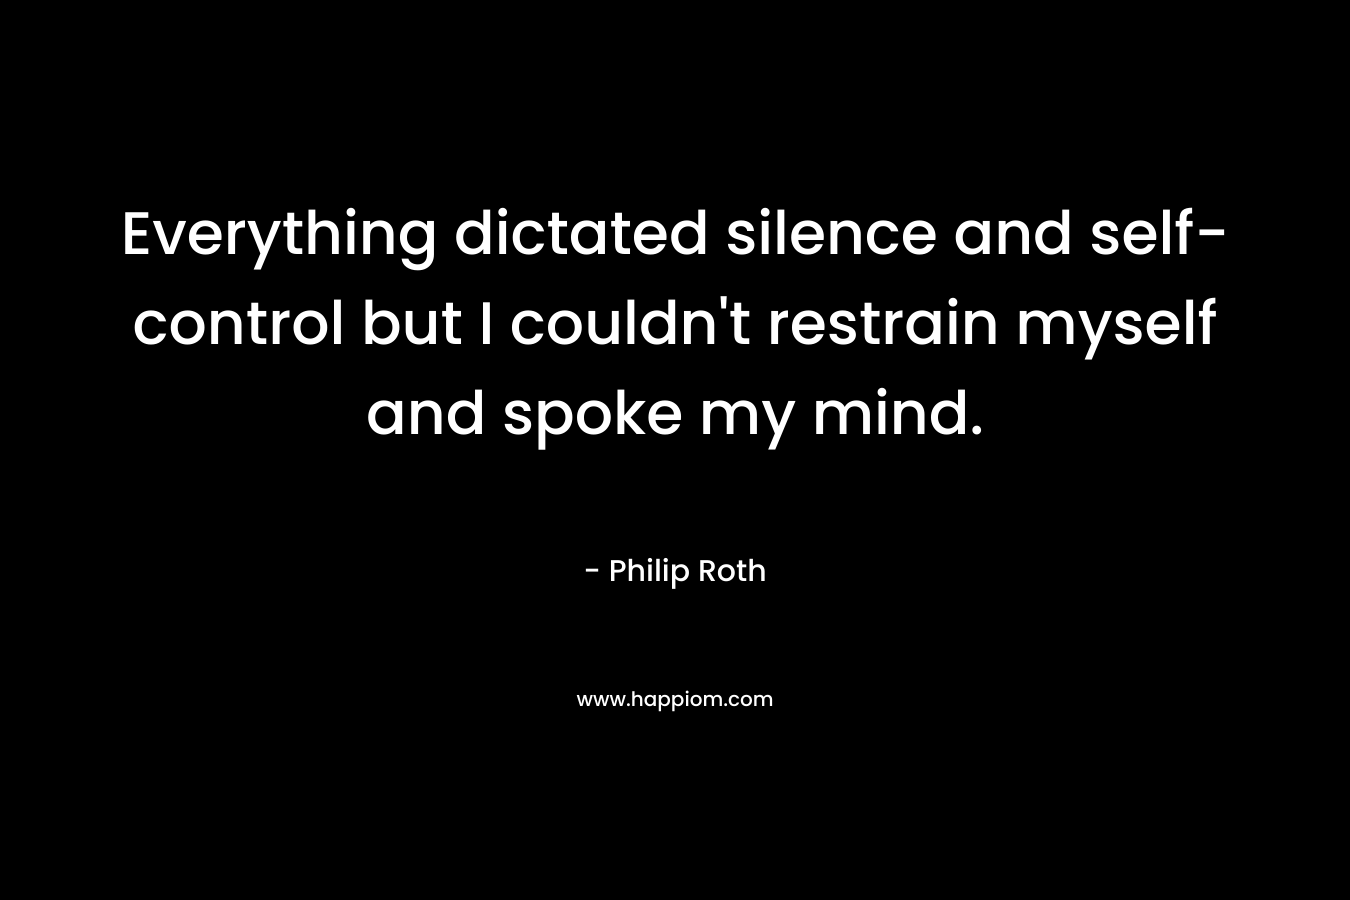 Everything dictated silence and self-control but I couldn’t restrain myself and spoke my mind. – Philip Roth